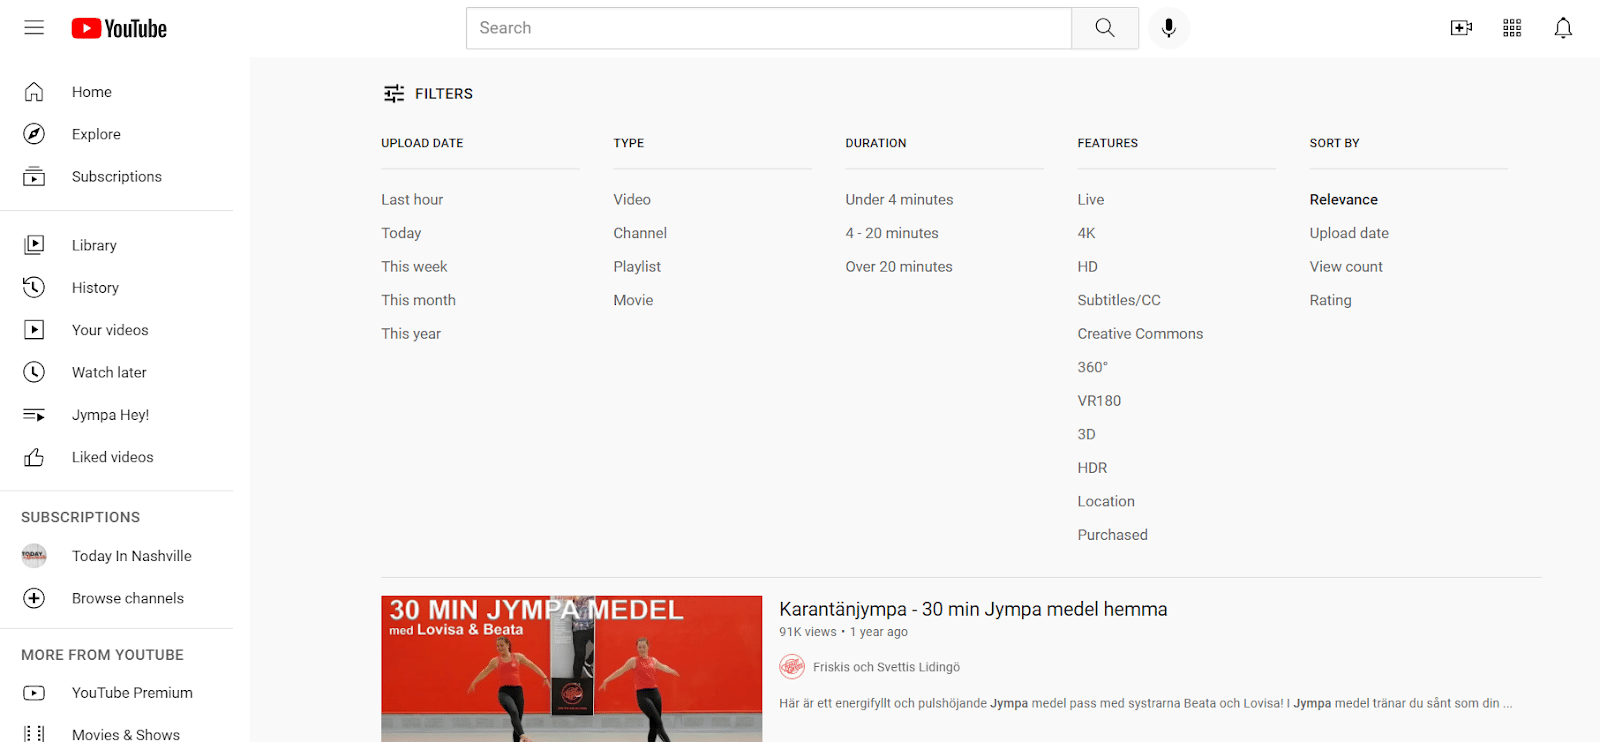 YouTube video search filters